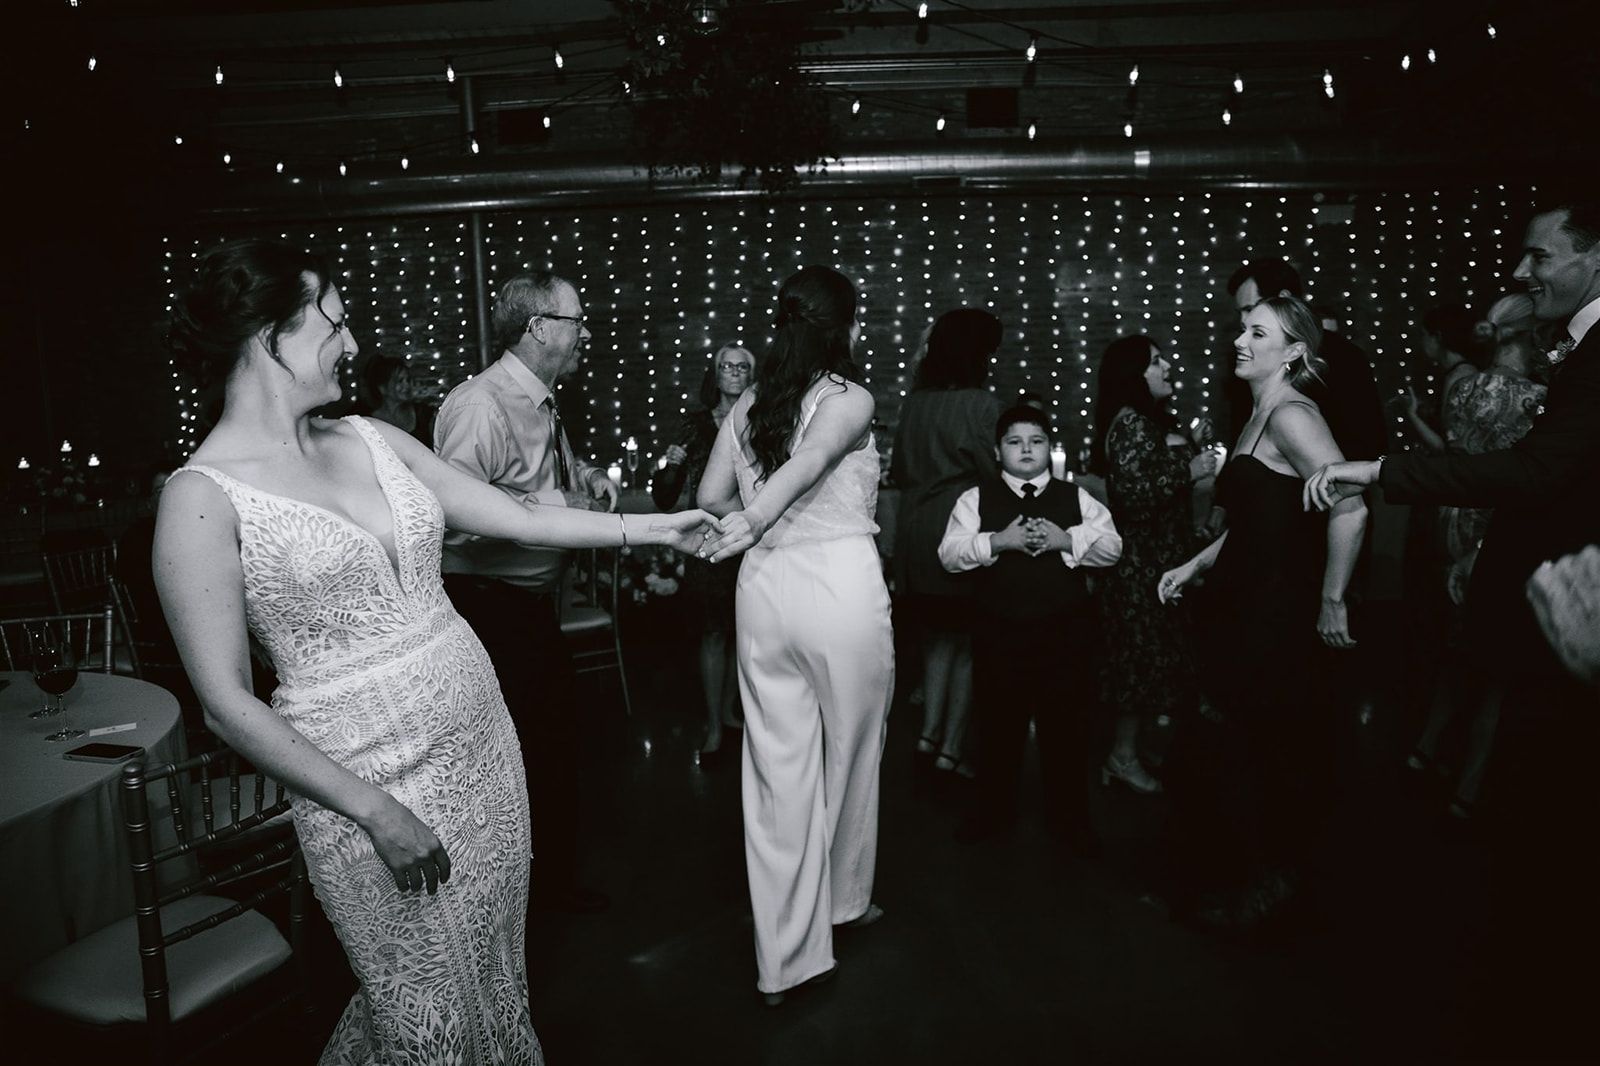 Guests joining the two brides on the dance floor, creating a lively and joyous atmosphere at Loft on Lake.